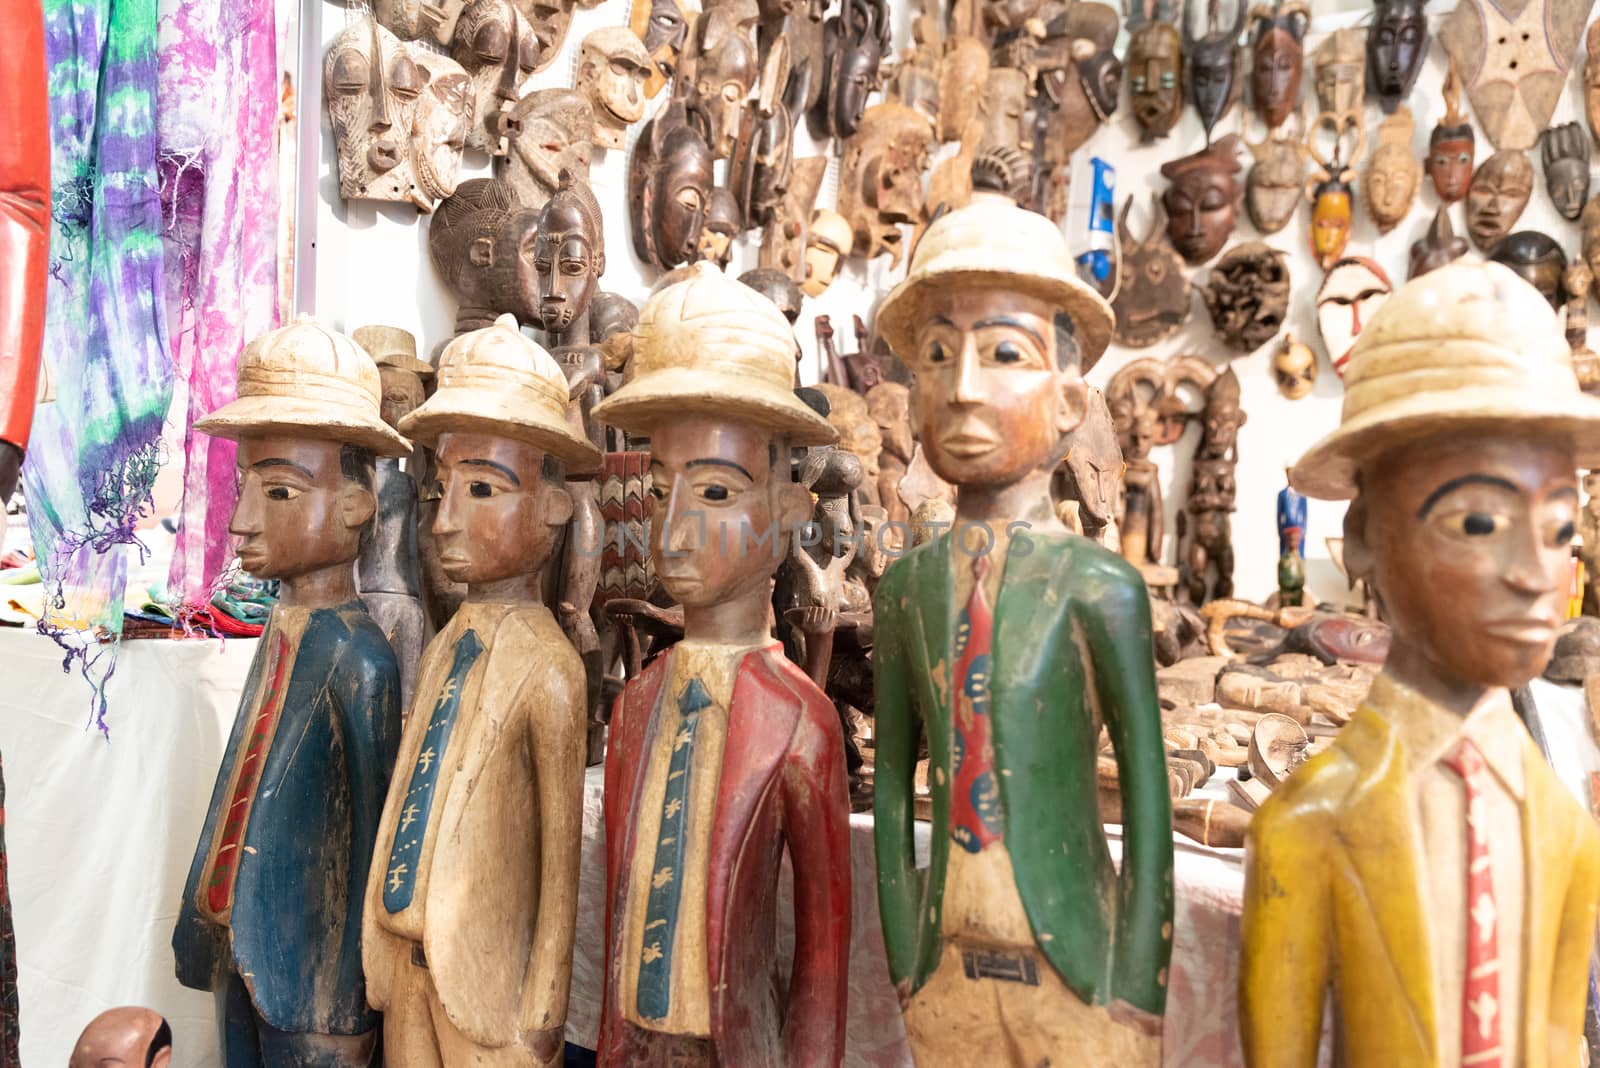 Ornamental objects from all over the world for sale in an ethnic market